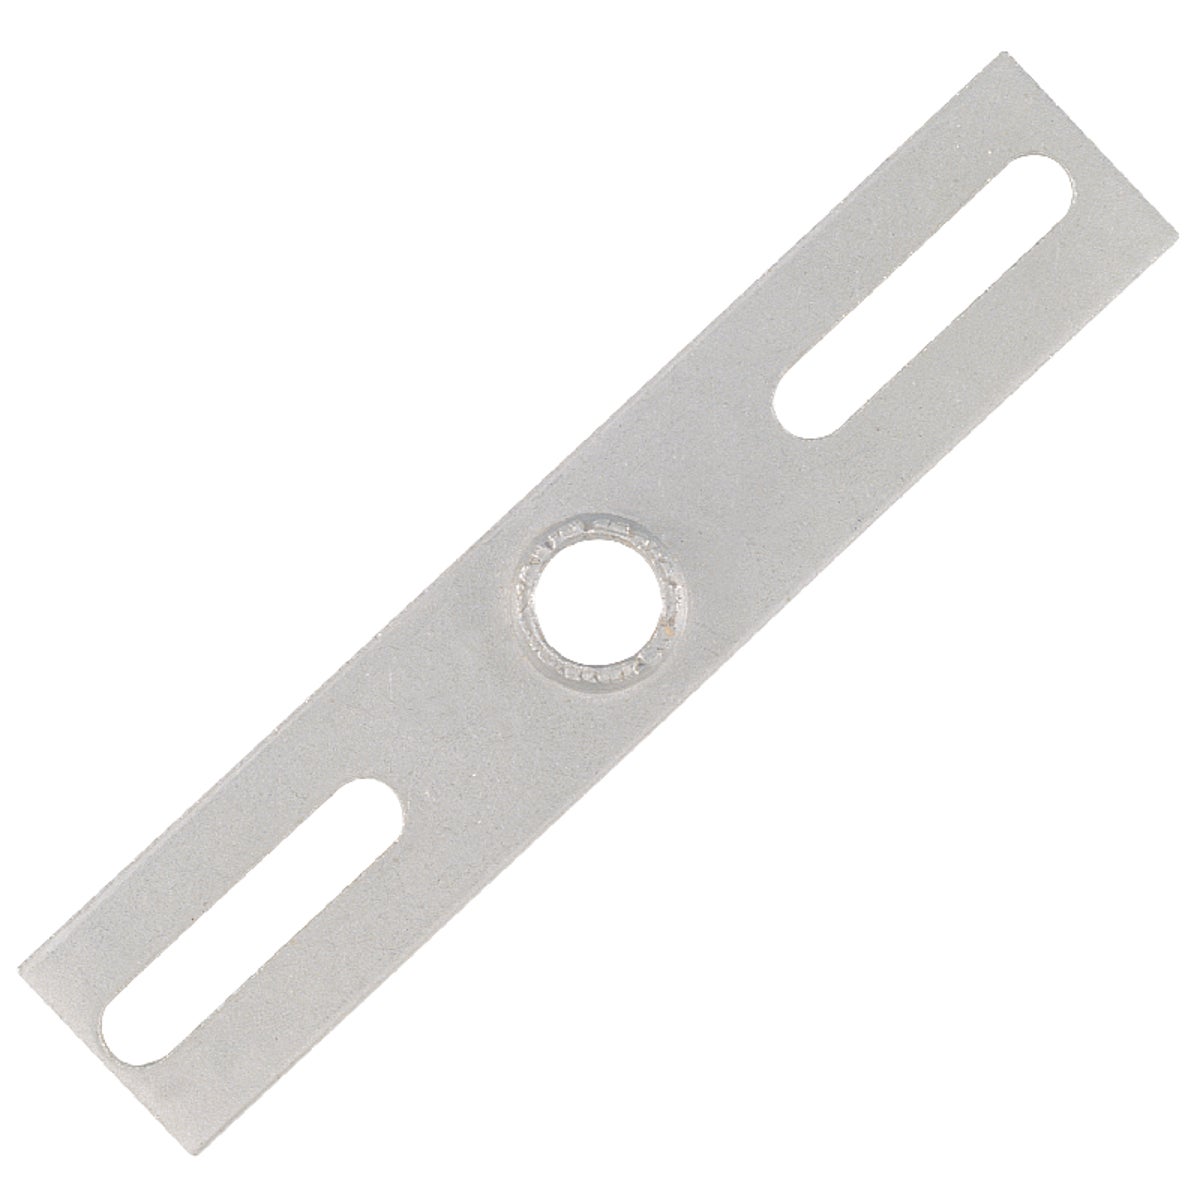 Item 532249, 4-inch ceiling cross bar. Threaded 1/8-inch IP. 45-pound load rating.